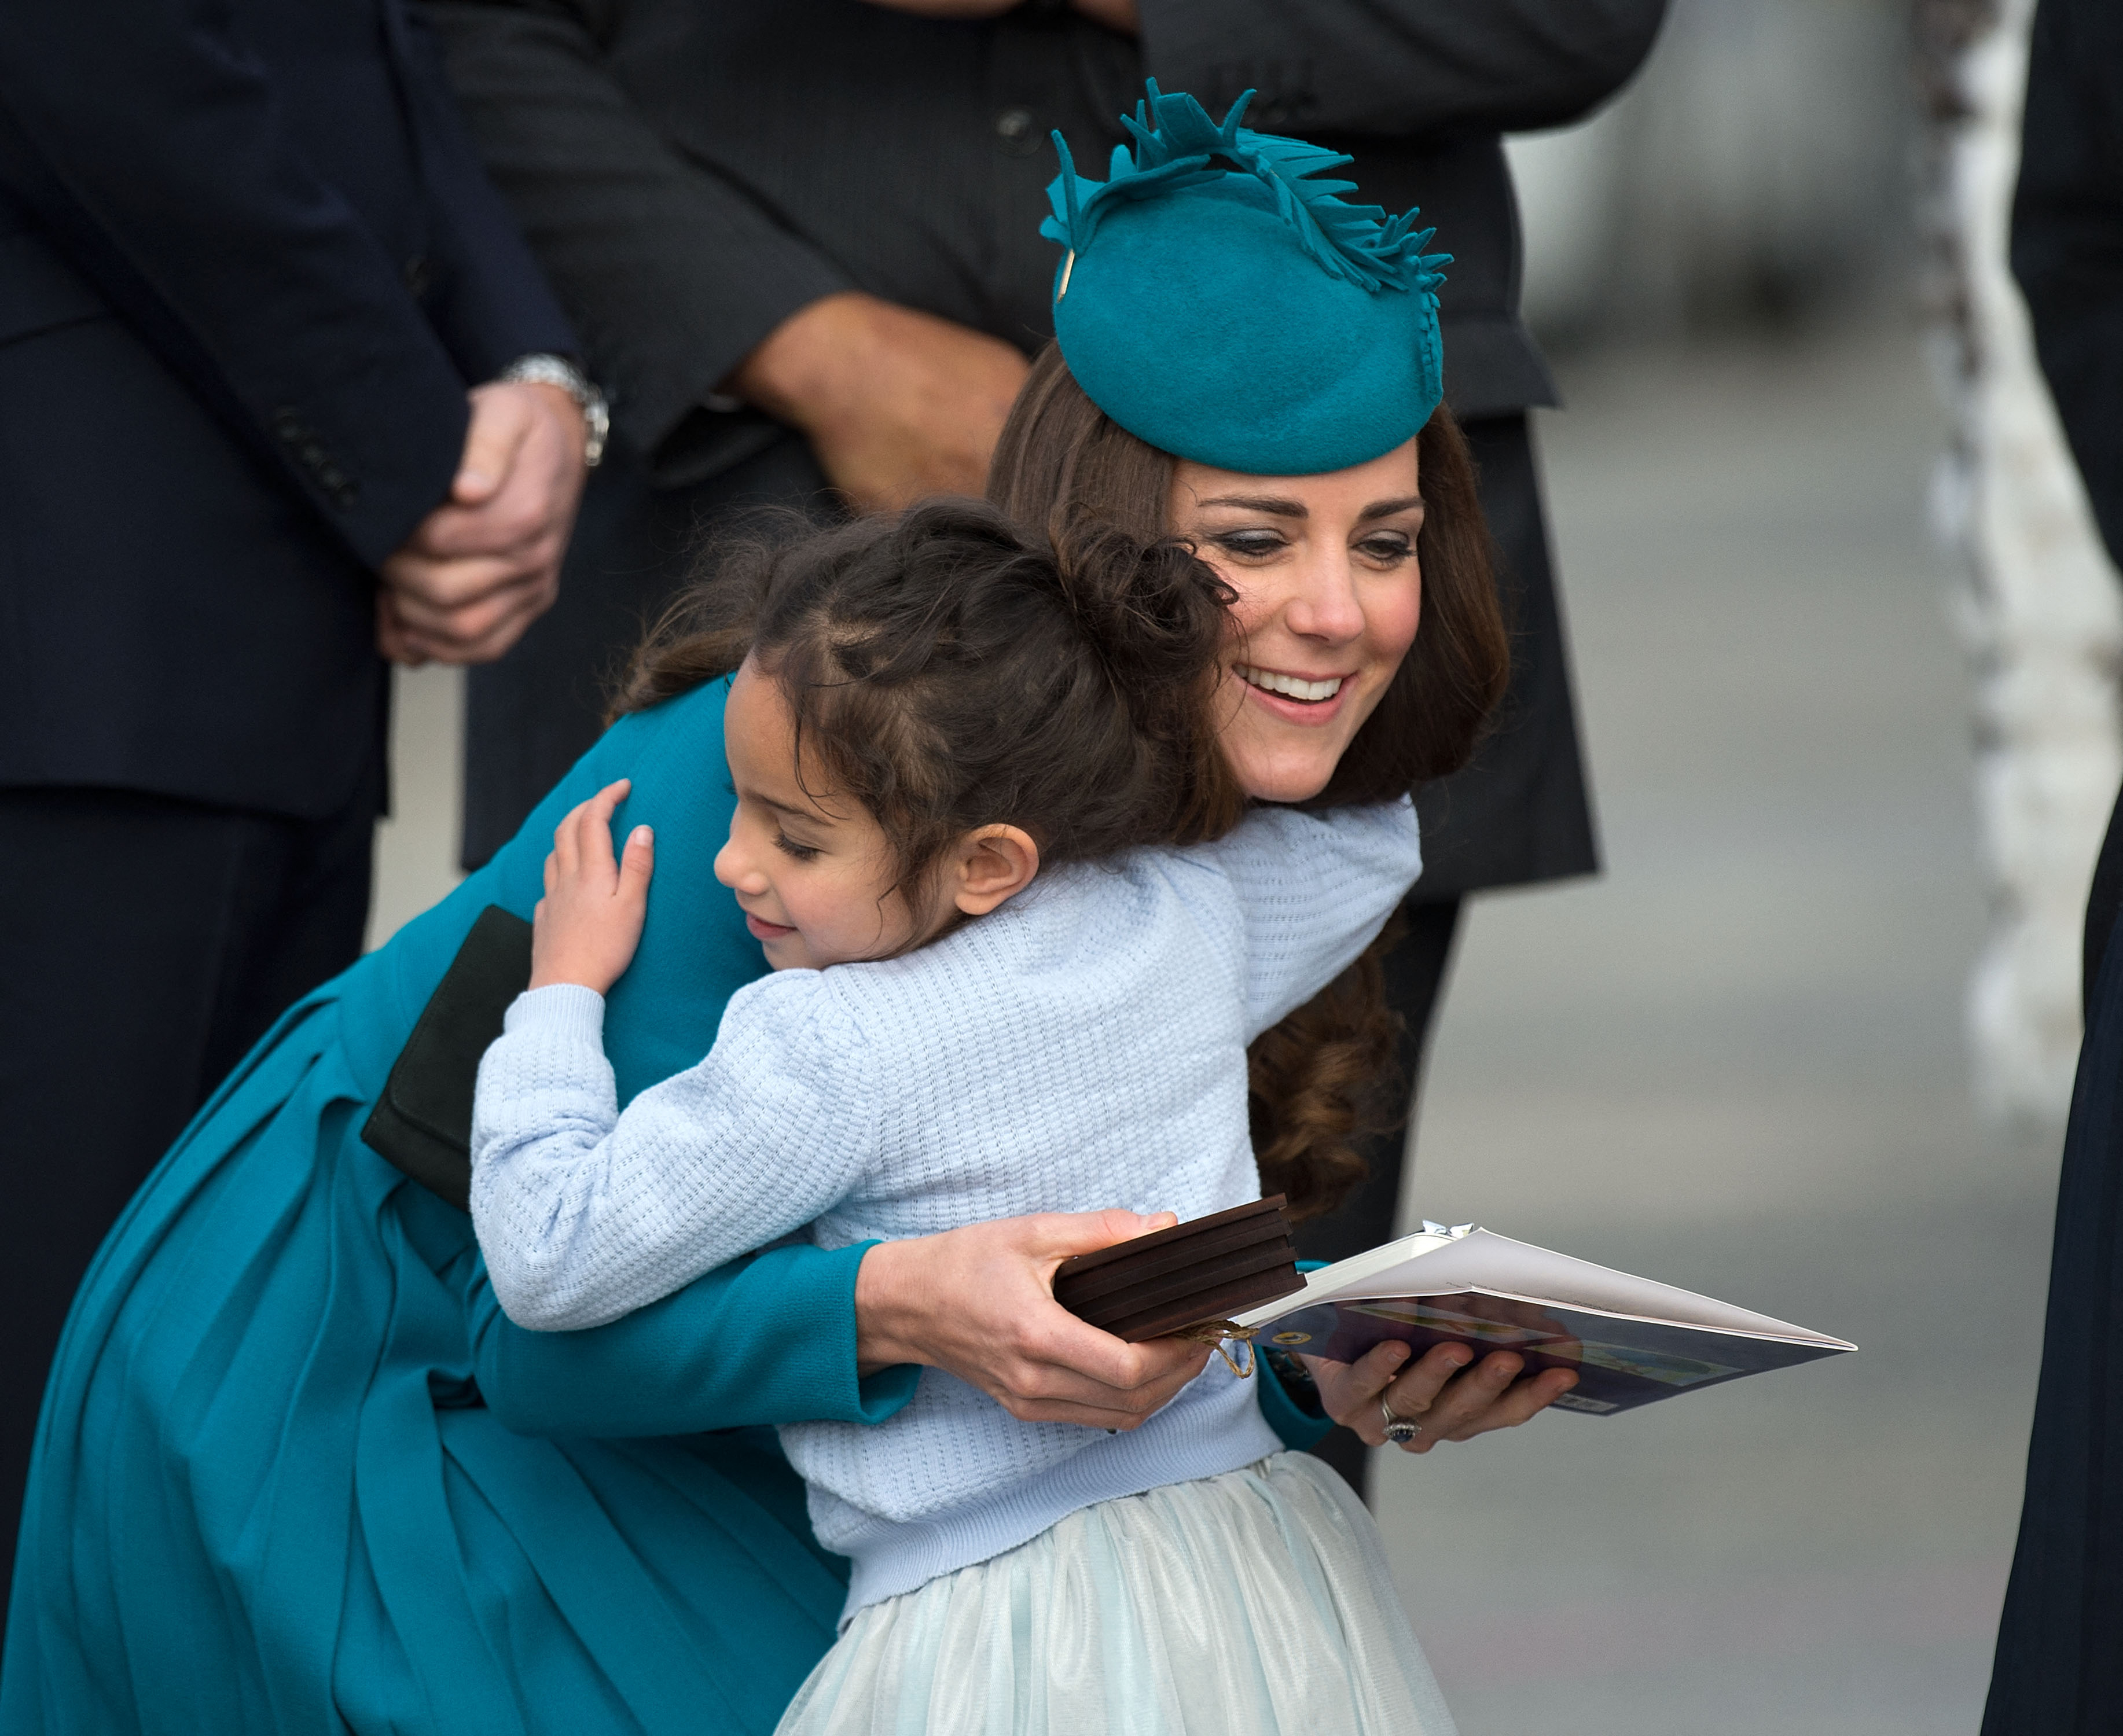 Catherine the Duchess of Cambridge receives a hug from a little Girl during a Maori welcome at Dunedin airport in Dunedin on April 13, 2014. | Source: Getty Images